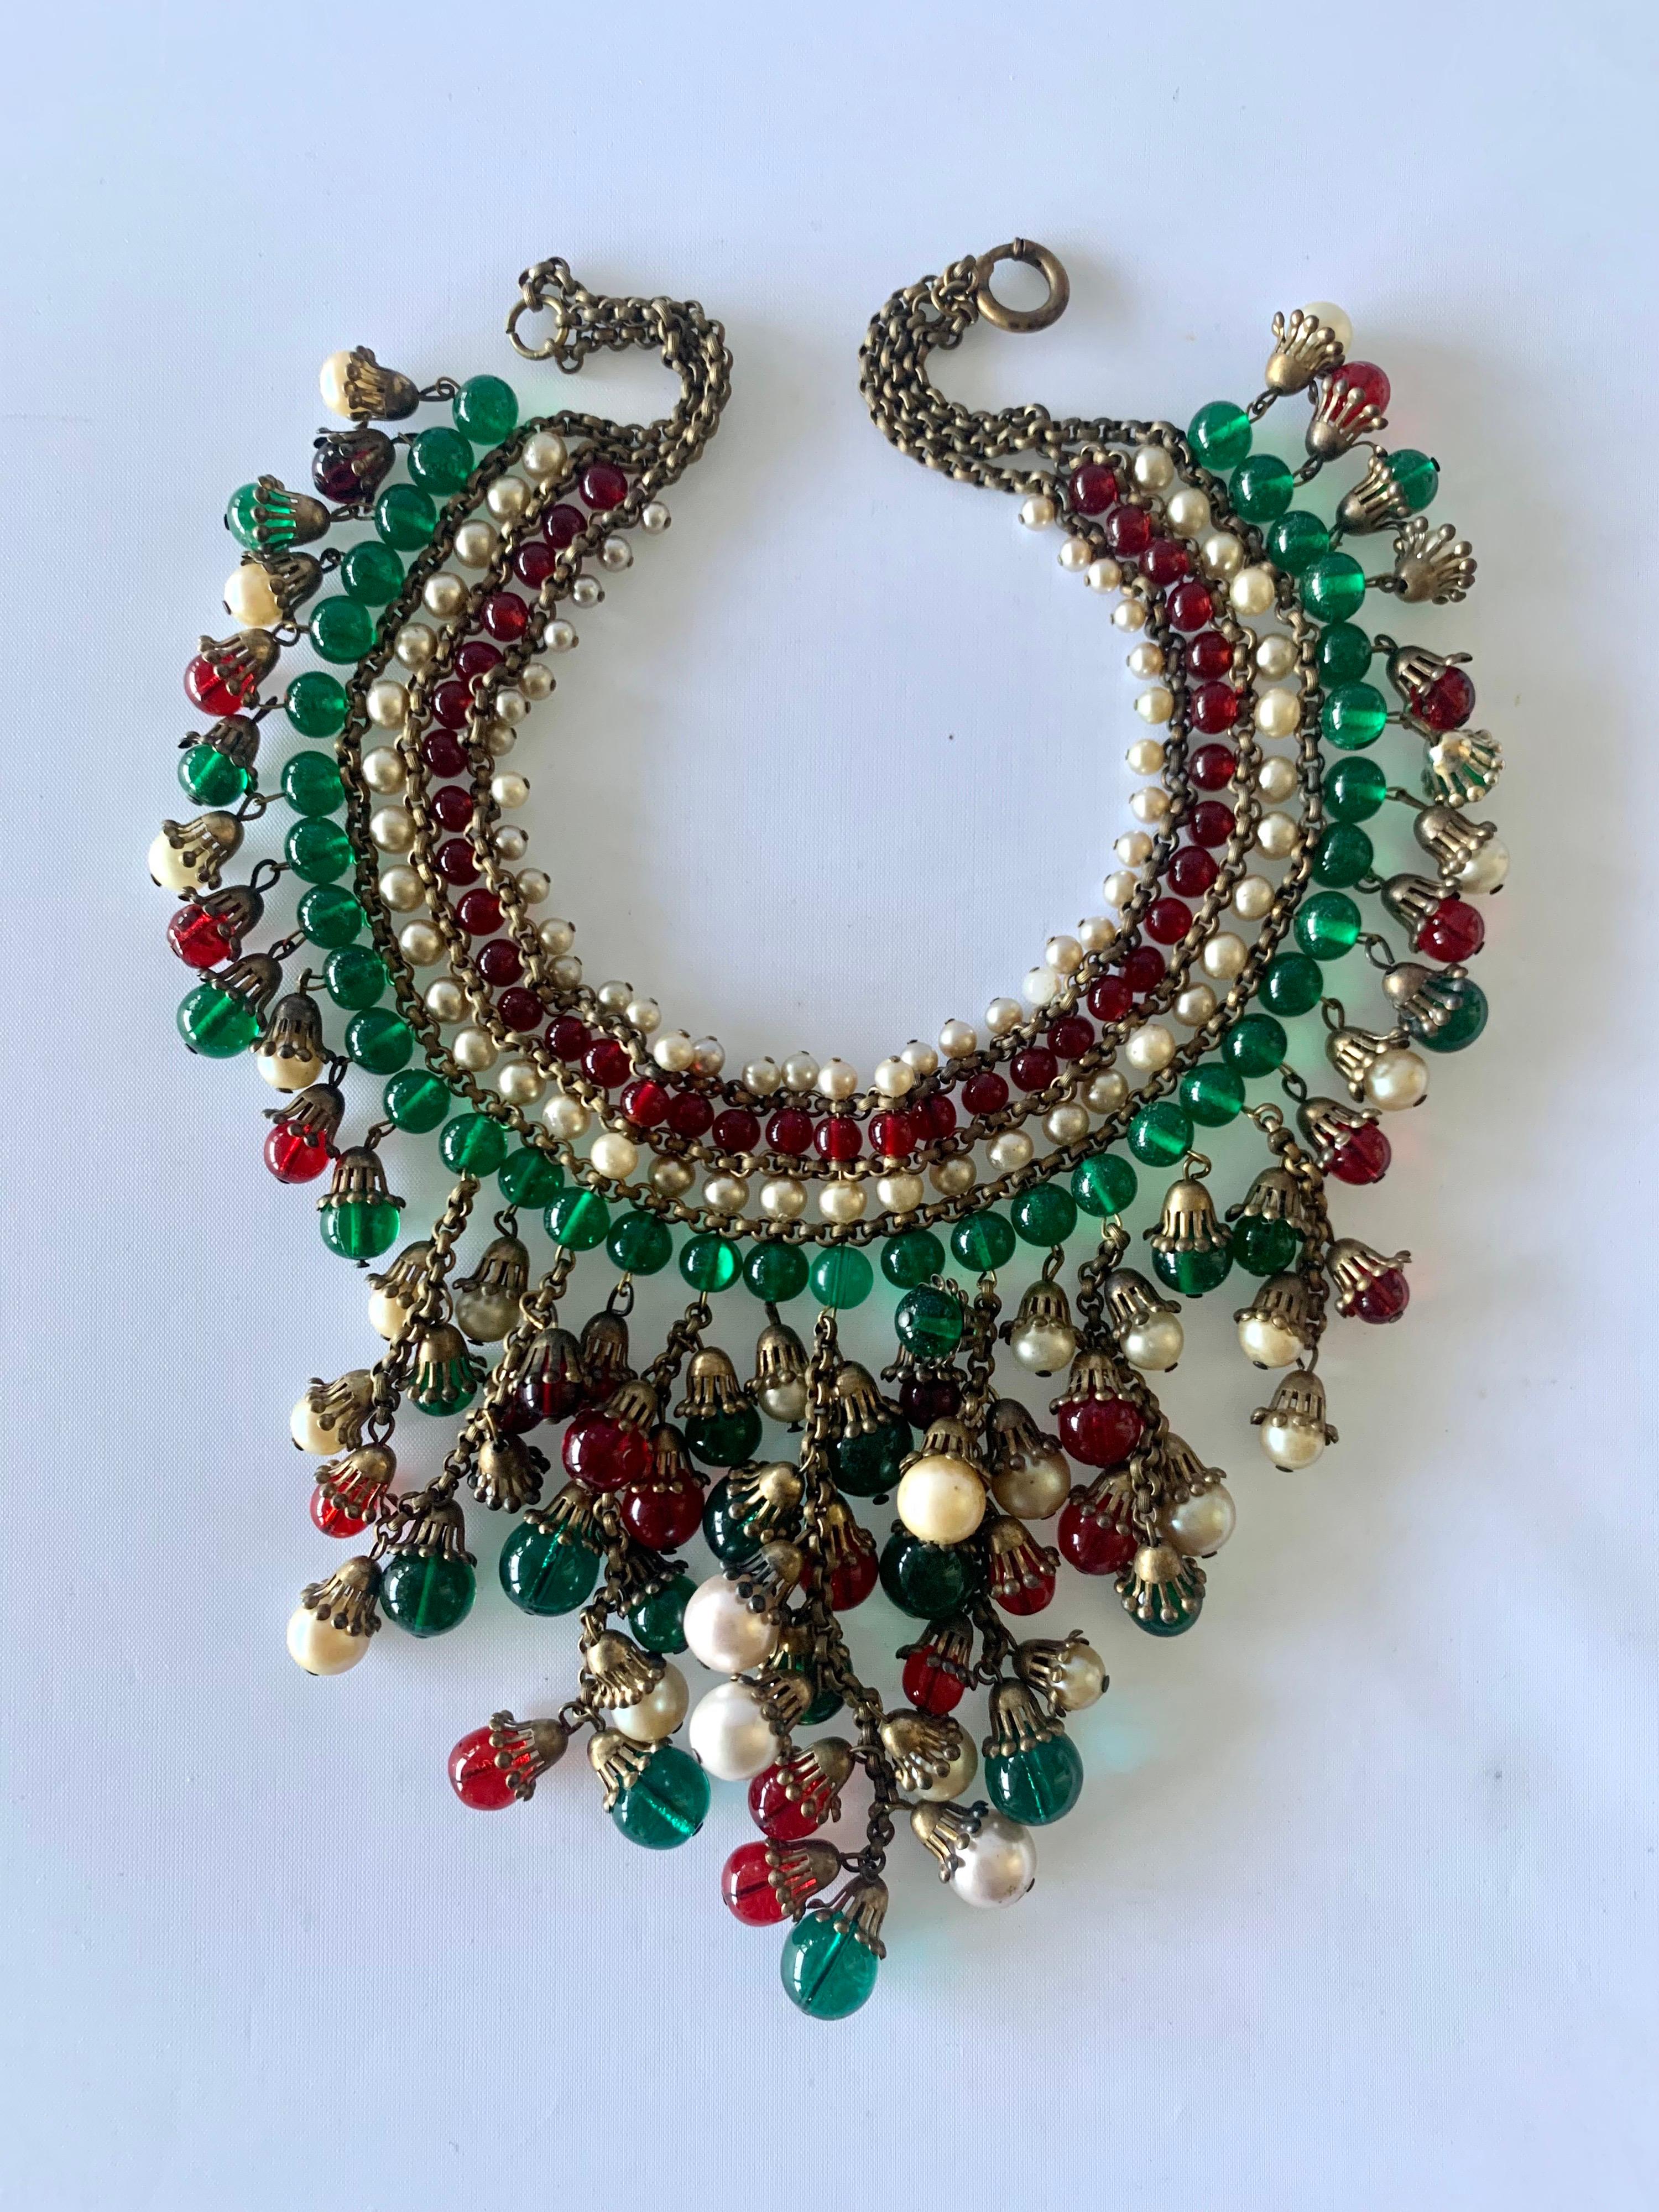 Important early Coco Chanel fringe metal chain statement necklace - comprised out of hundreds of green and red glass beads by Maison Gripoix and cream-colored pearls by Maison Rousselet. The beads, pearls, and metal findings have been assembled in a